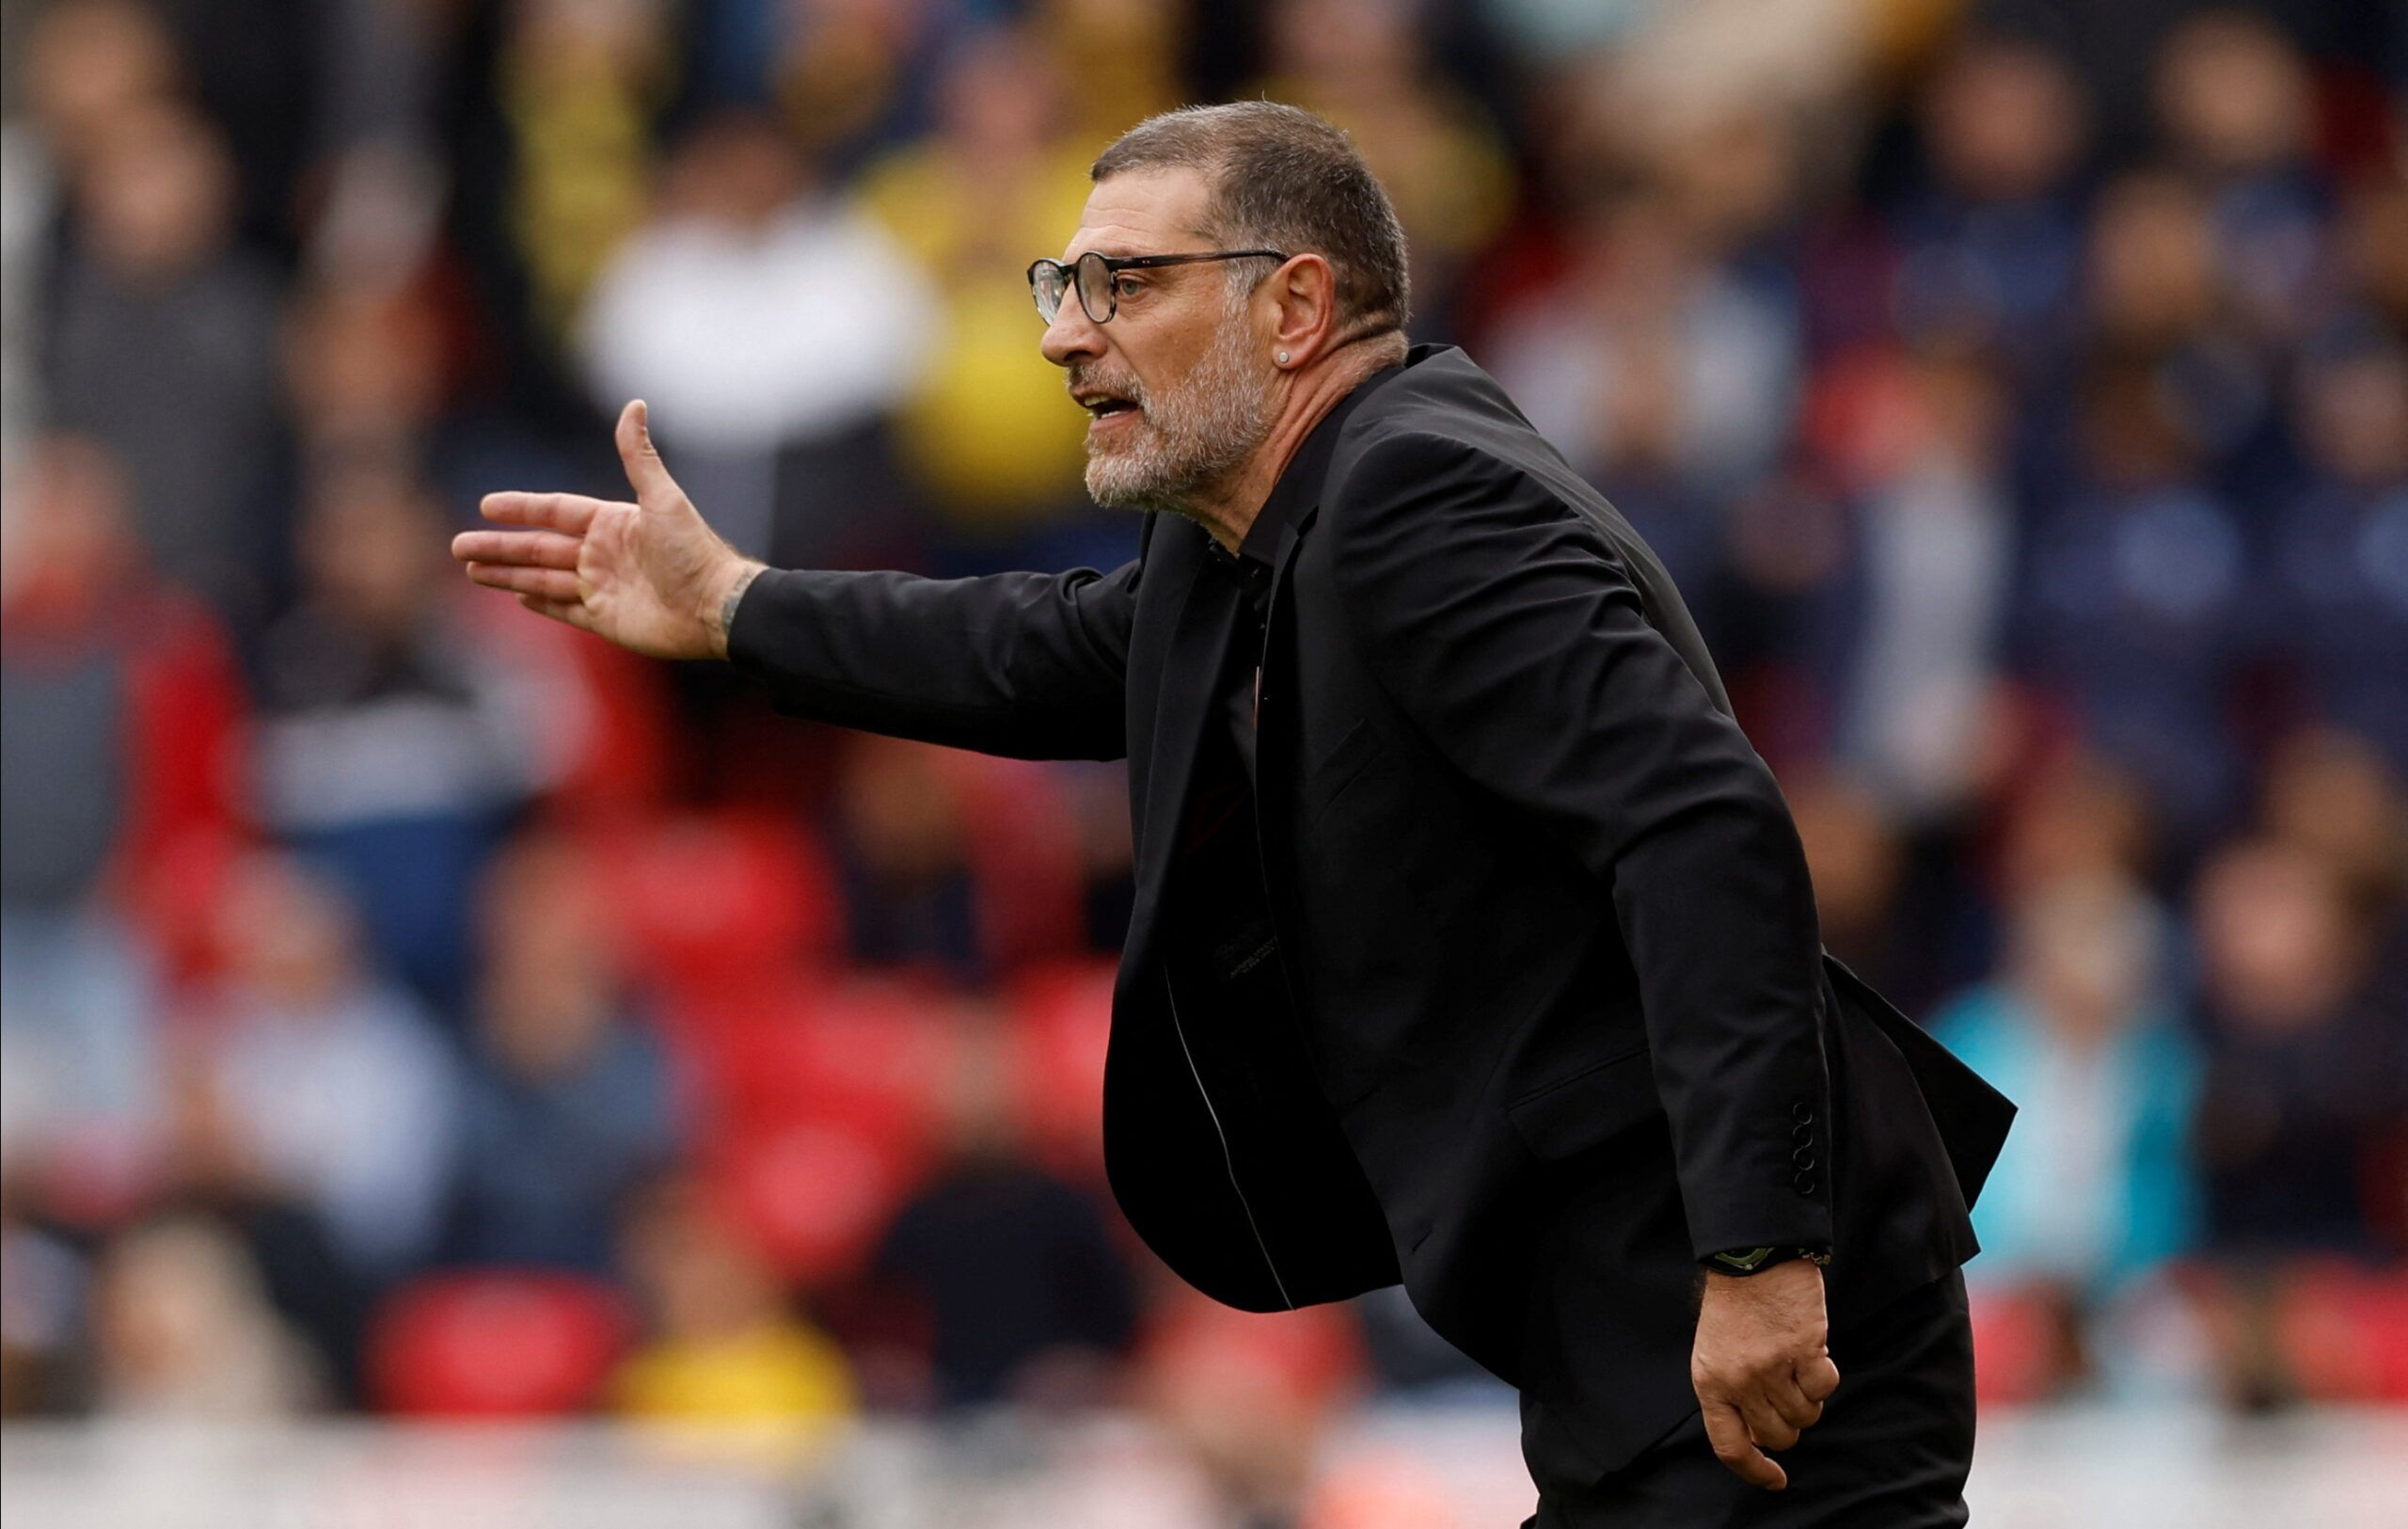 Soccer Football - Championship - Stoke City v Watford - bet365 Stadium, Stoke-on-Trent, Britain - October 2, 2022 Watford manager Slaven Bilic  Action Images/Jason Cairnduff  EDITORIAL USE ONLY. No use with unauthorized audio, video, data, fixture lists, club/league logos or 